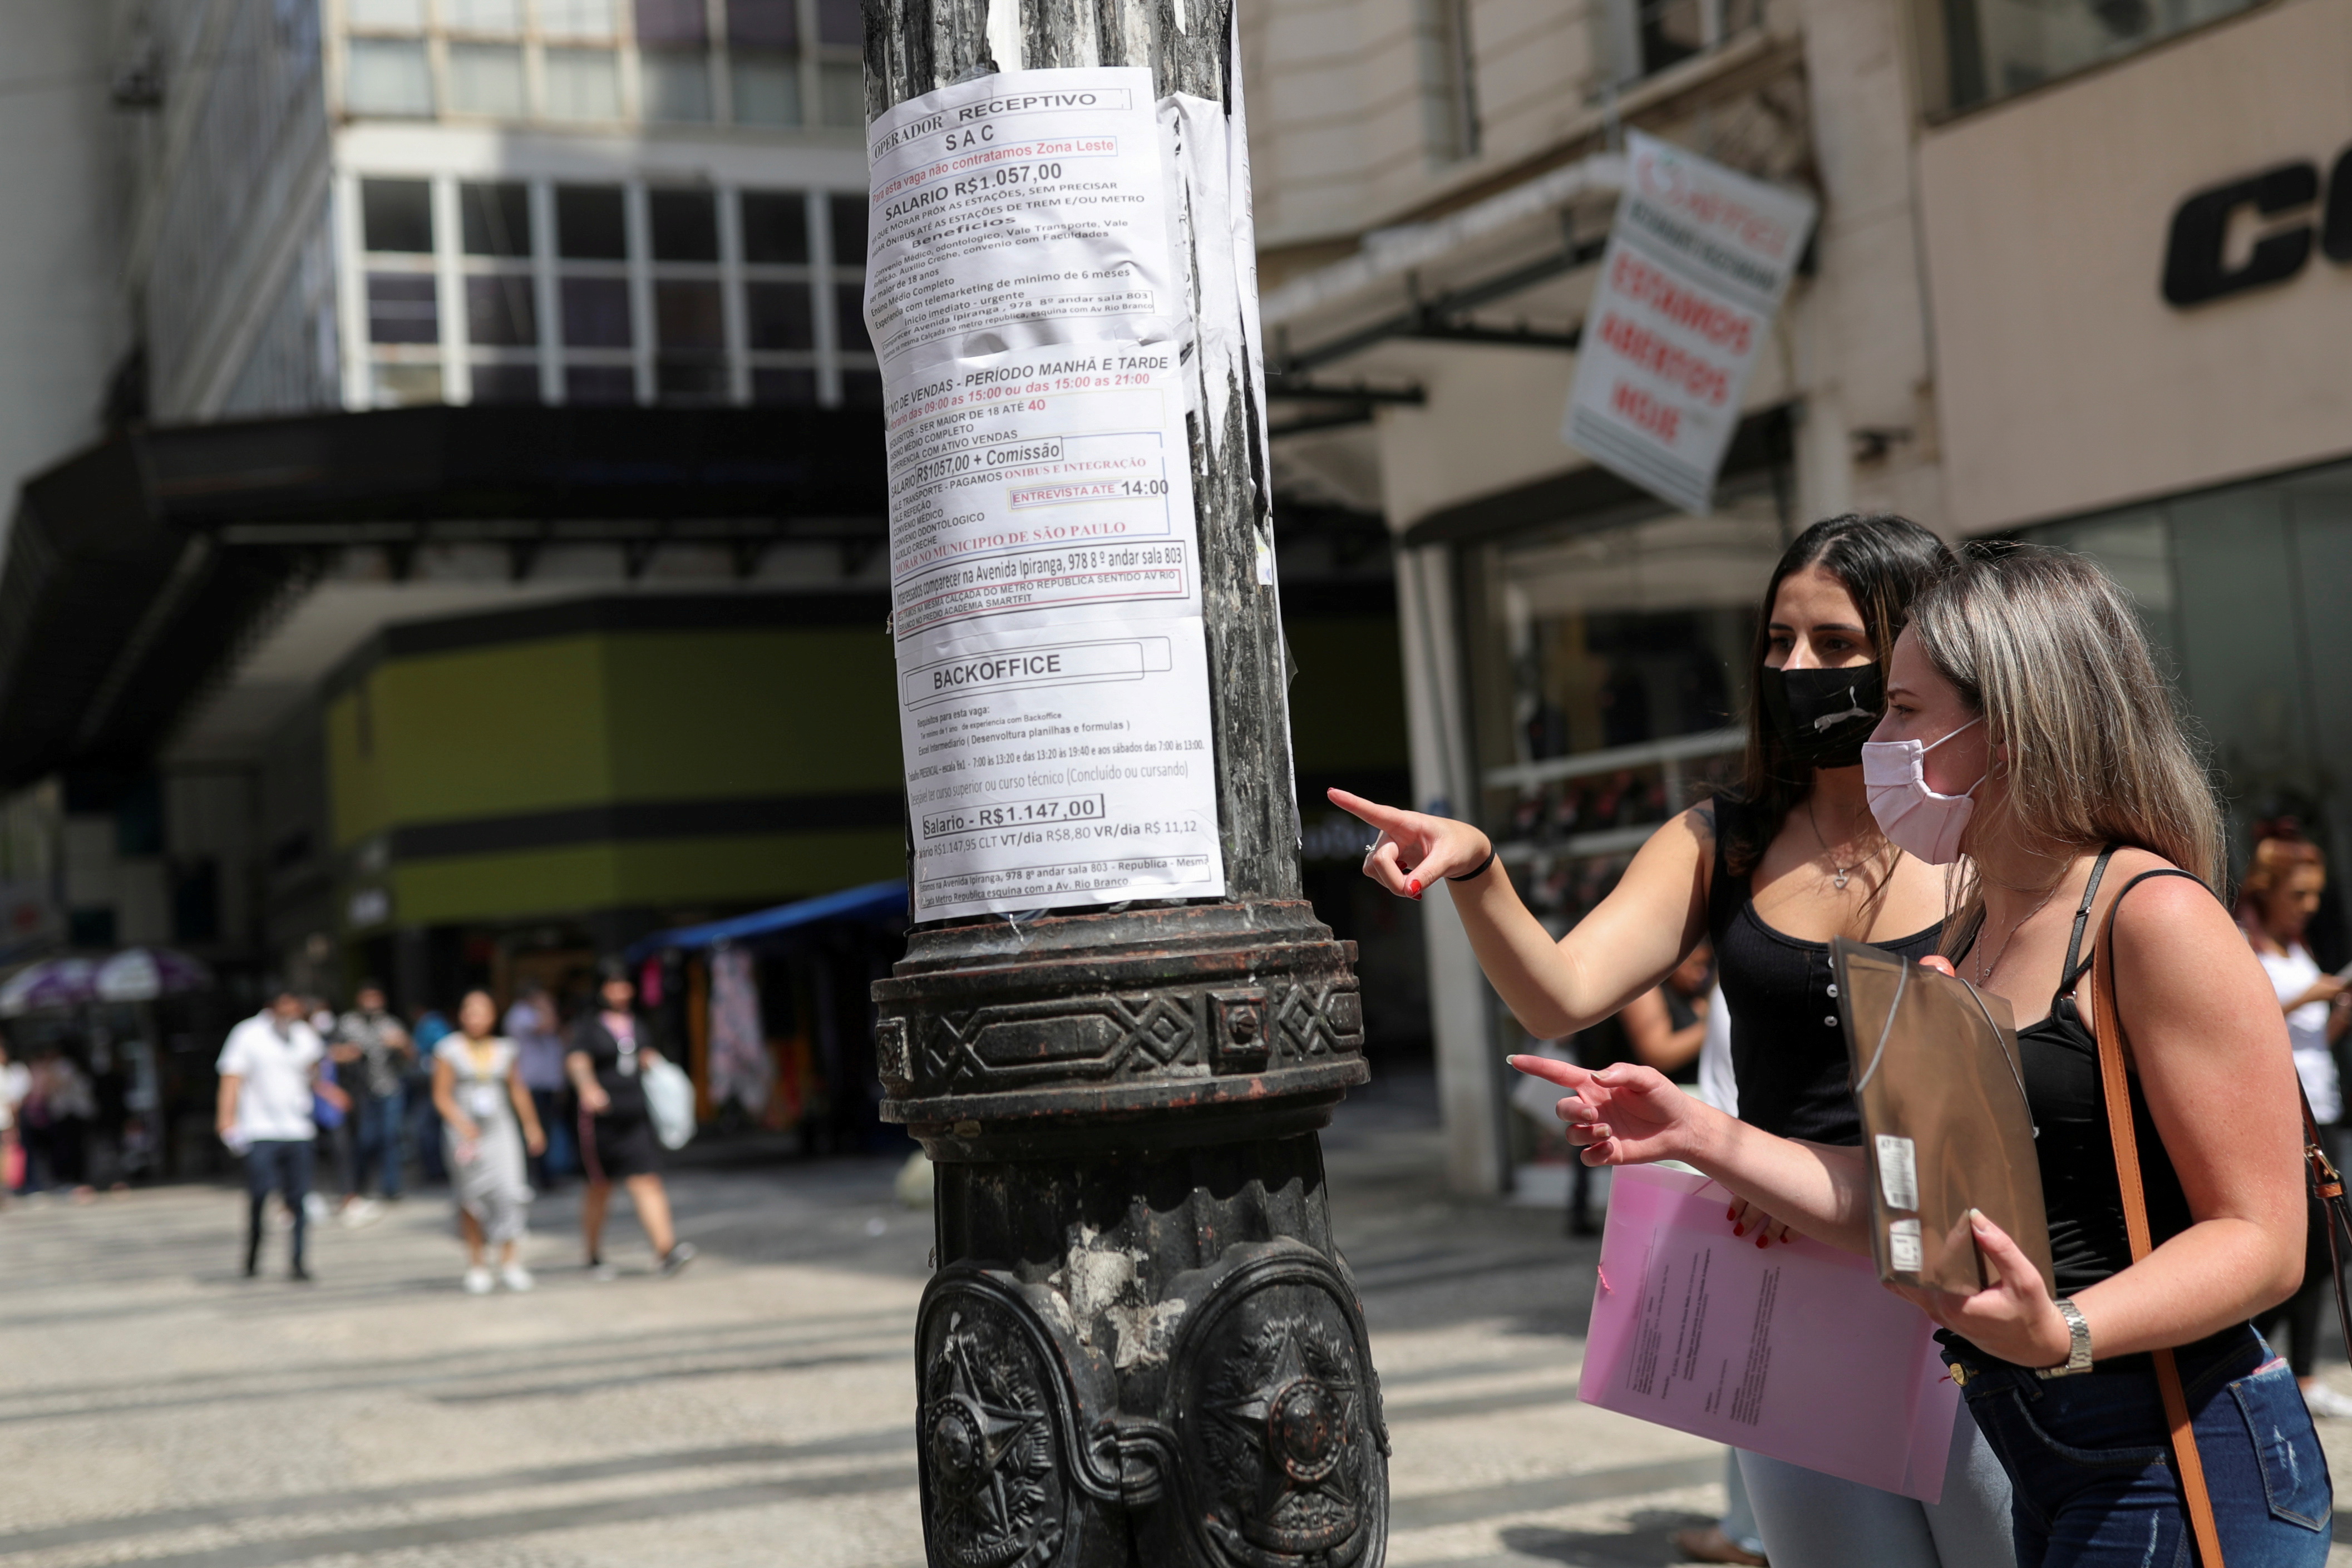 Women look at job listings posted on a light pole in downtown Sao Paulo